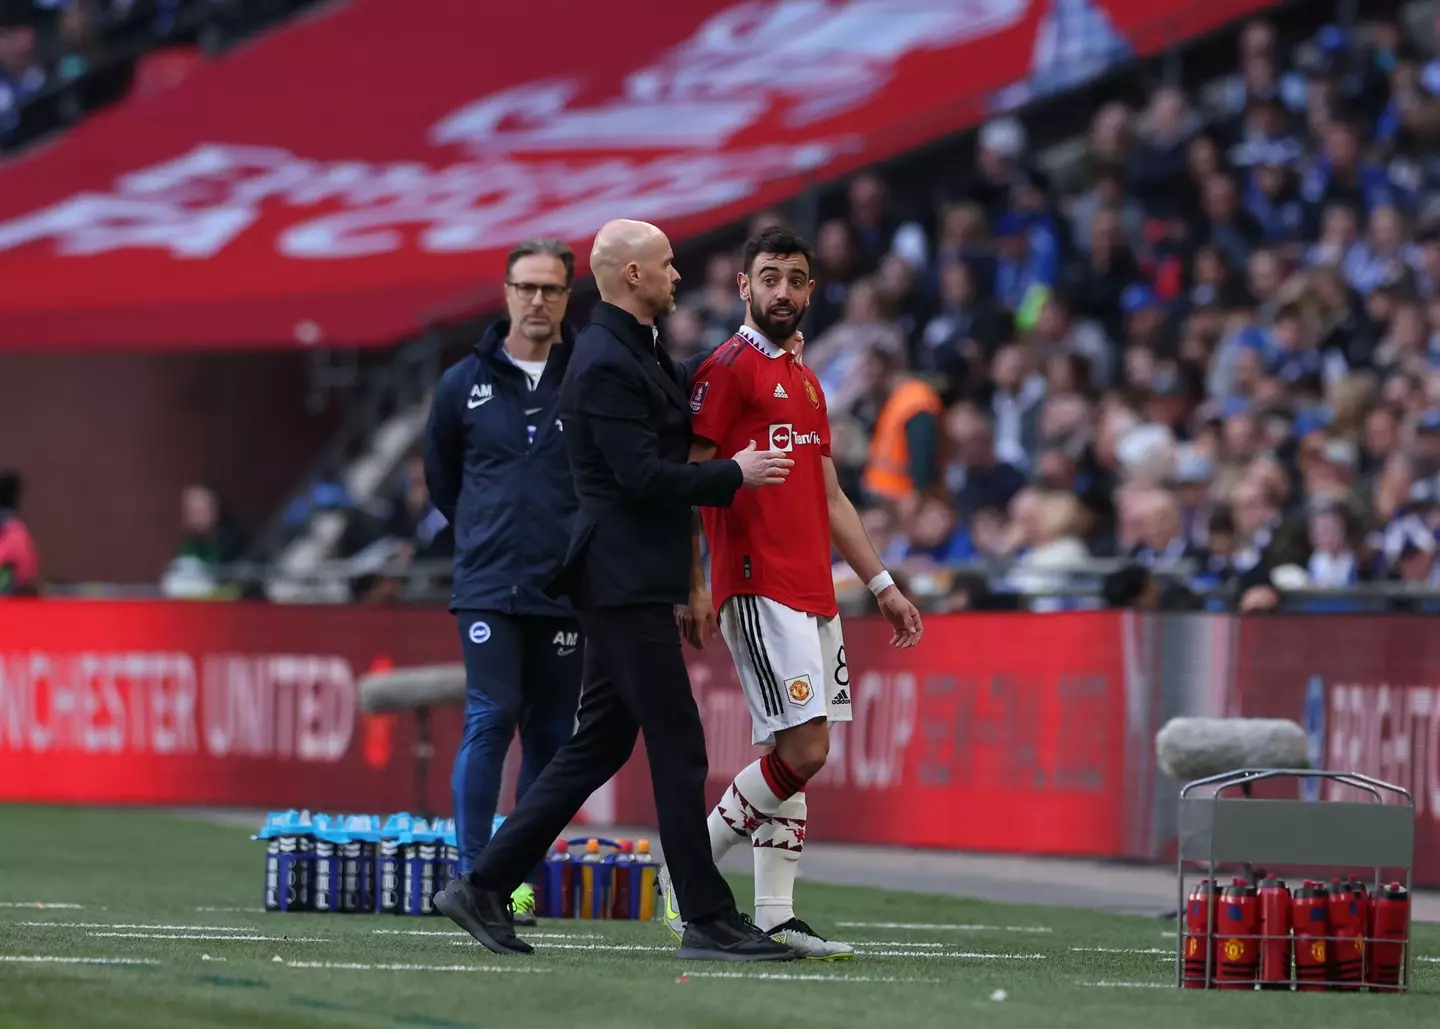 Fernandes was taken off in extra time. Image: Alamy